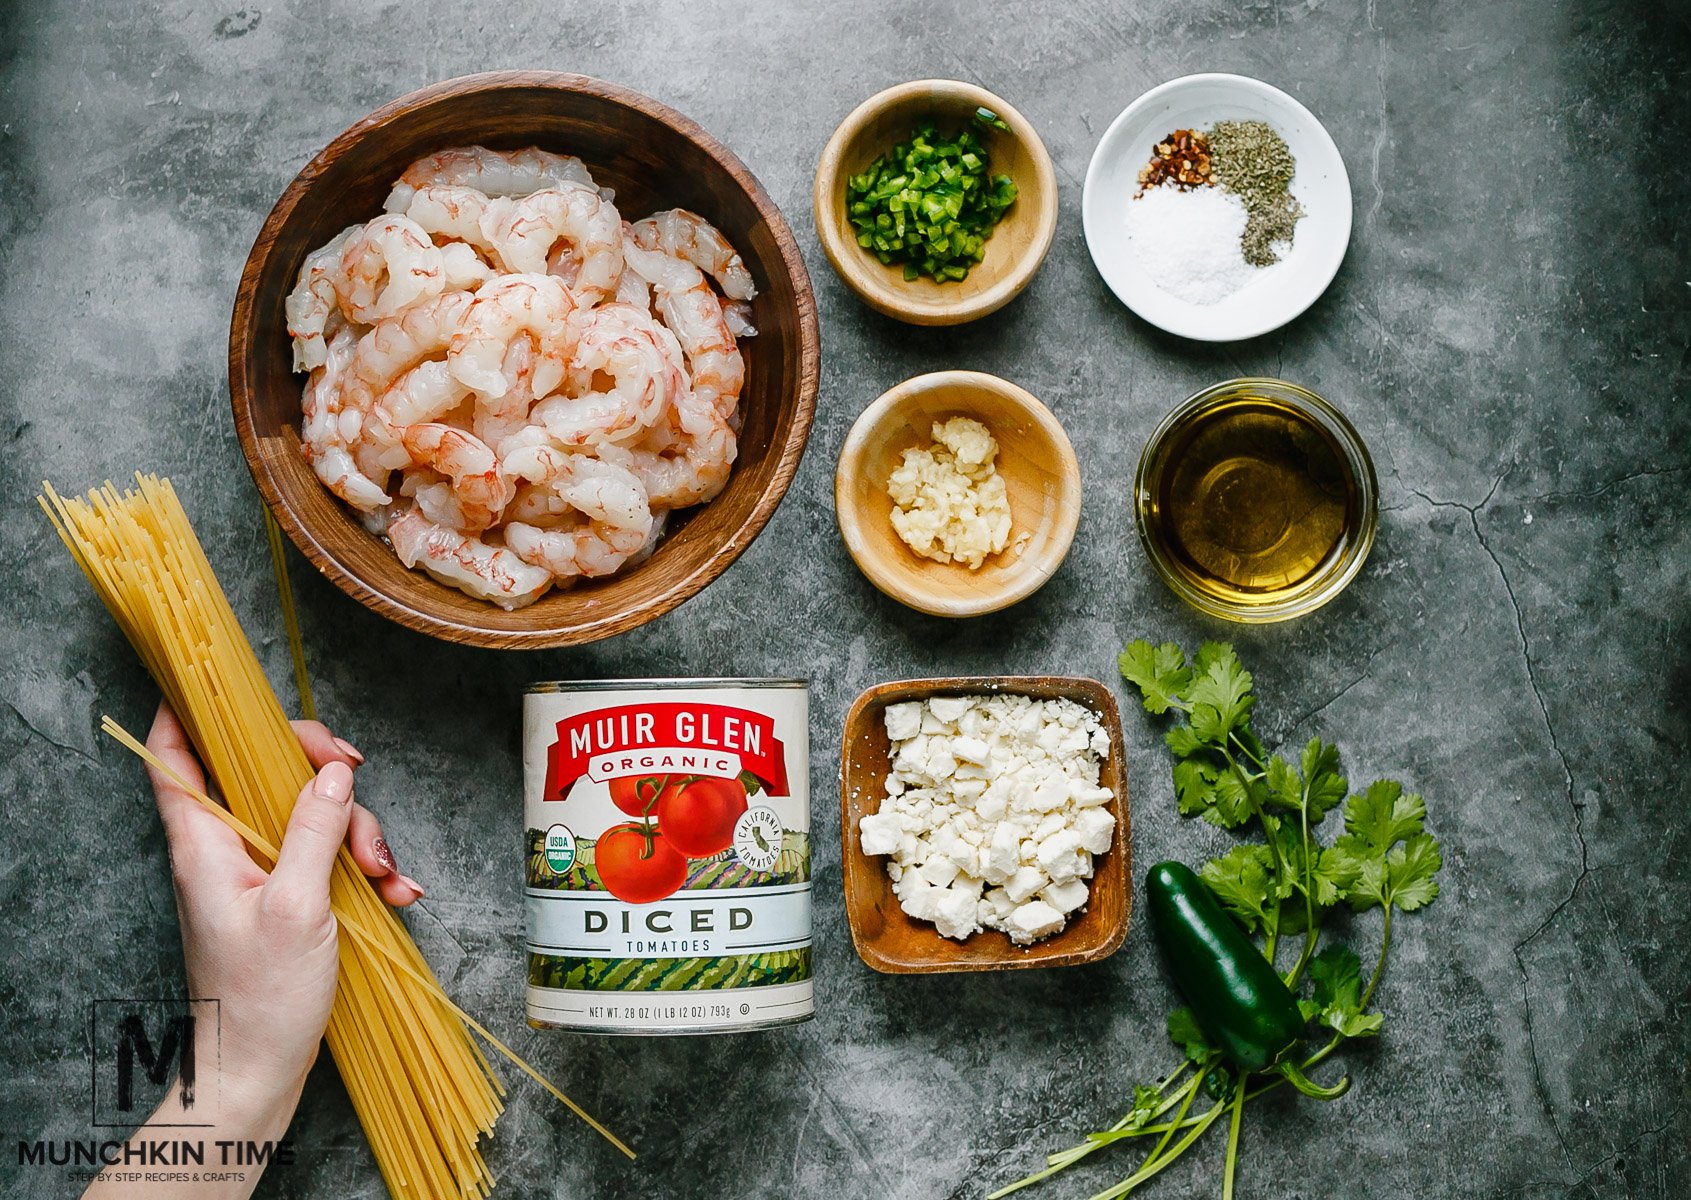 All ingredients on a table for Italian Shrimp Pasta. They are pasta, raw shrimp, tomatoes in a can, feta cheese, onion, garlic, seasonings, onion, jalapeño and greens.